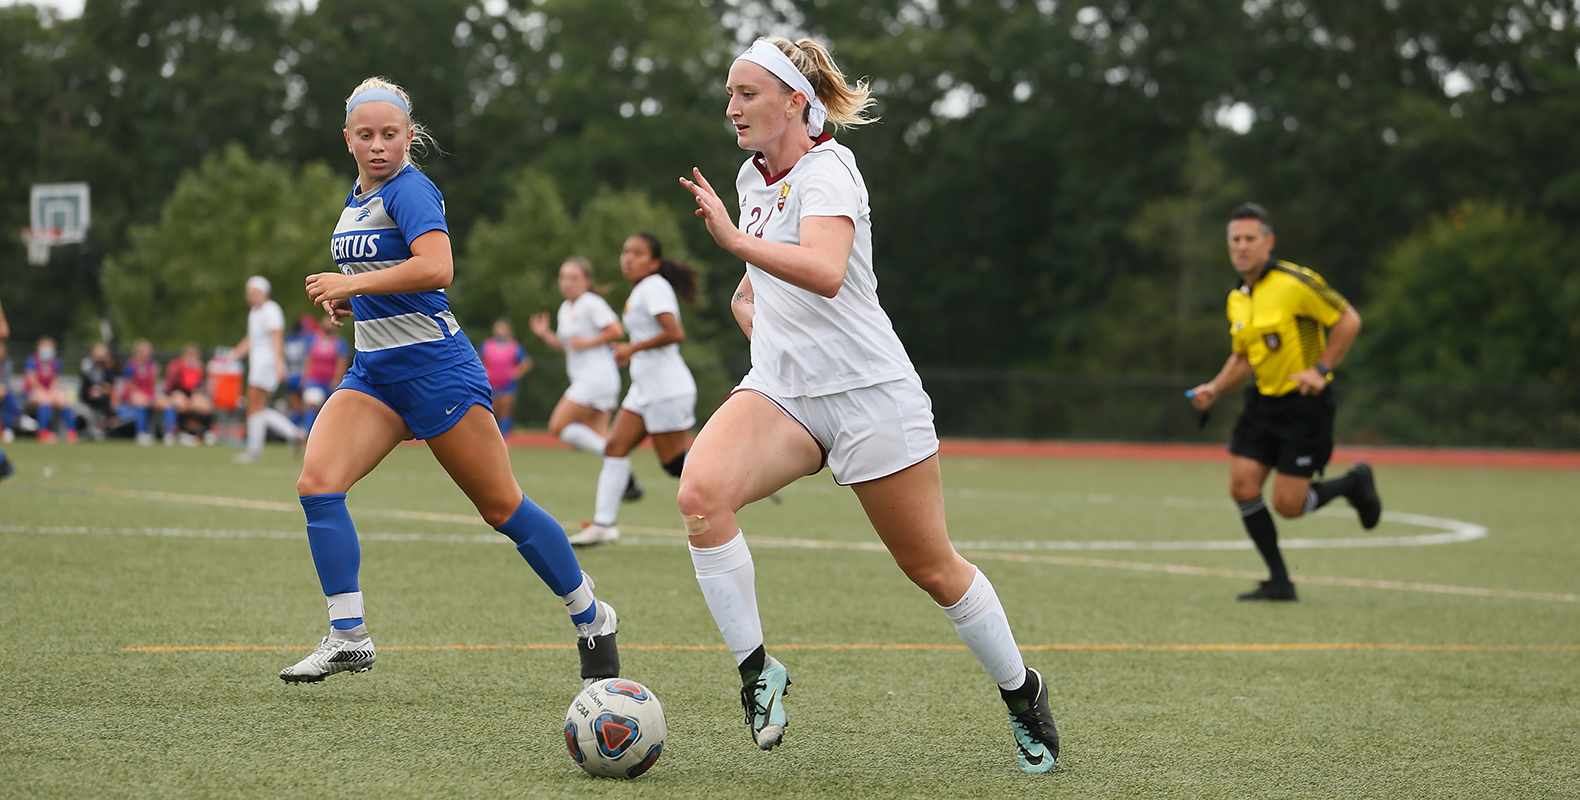 Late Goal Propels Regis Women’s Soccer to First Victory of Season